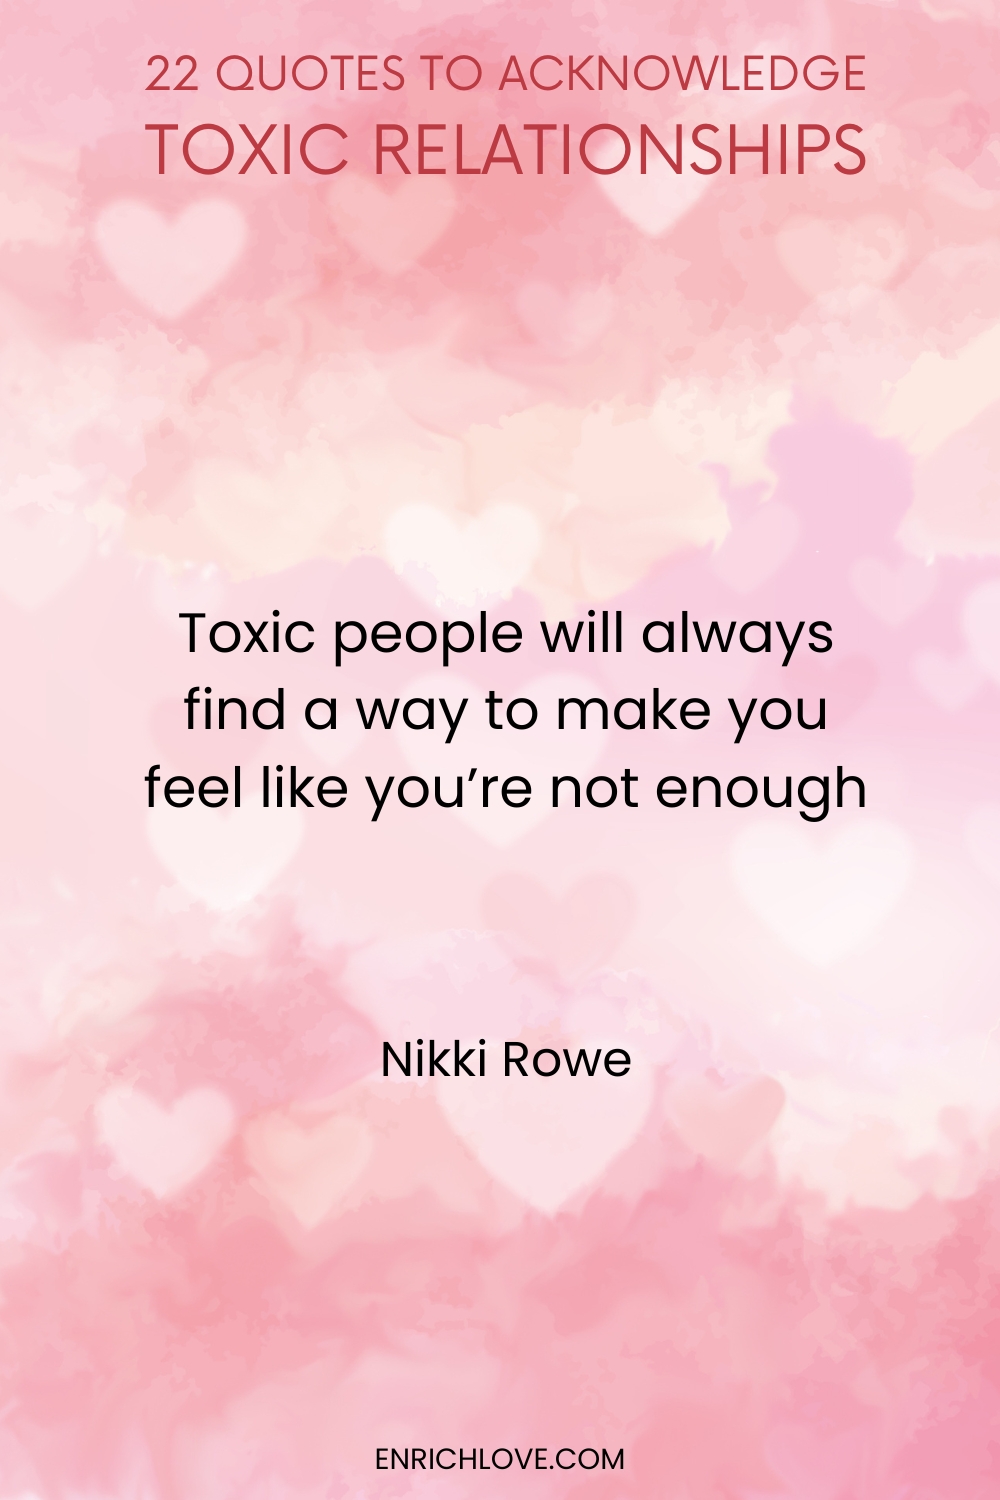 22 Quotes to Acknowledge Toxic Relationships -Toxic people will always find a way to make you feel like you're not enough by Nikki Rowe